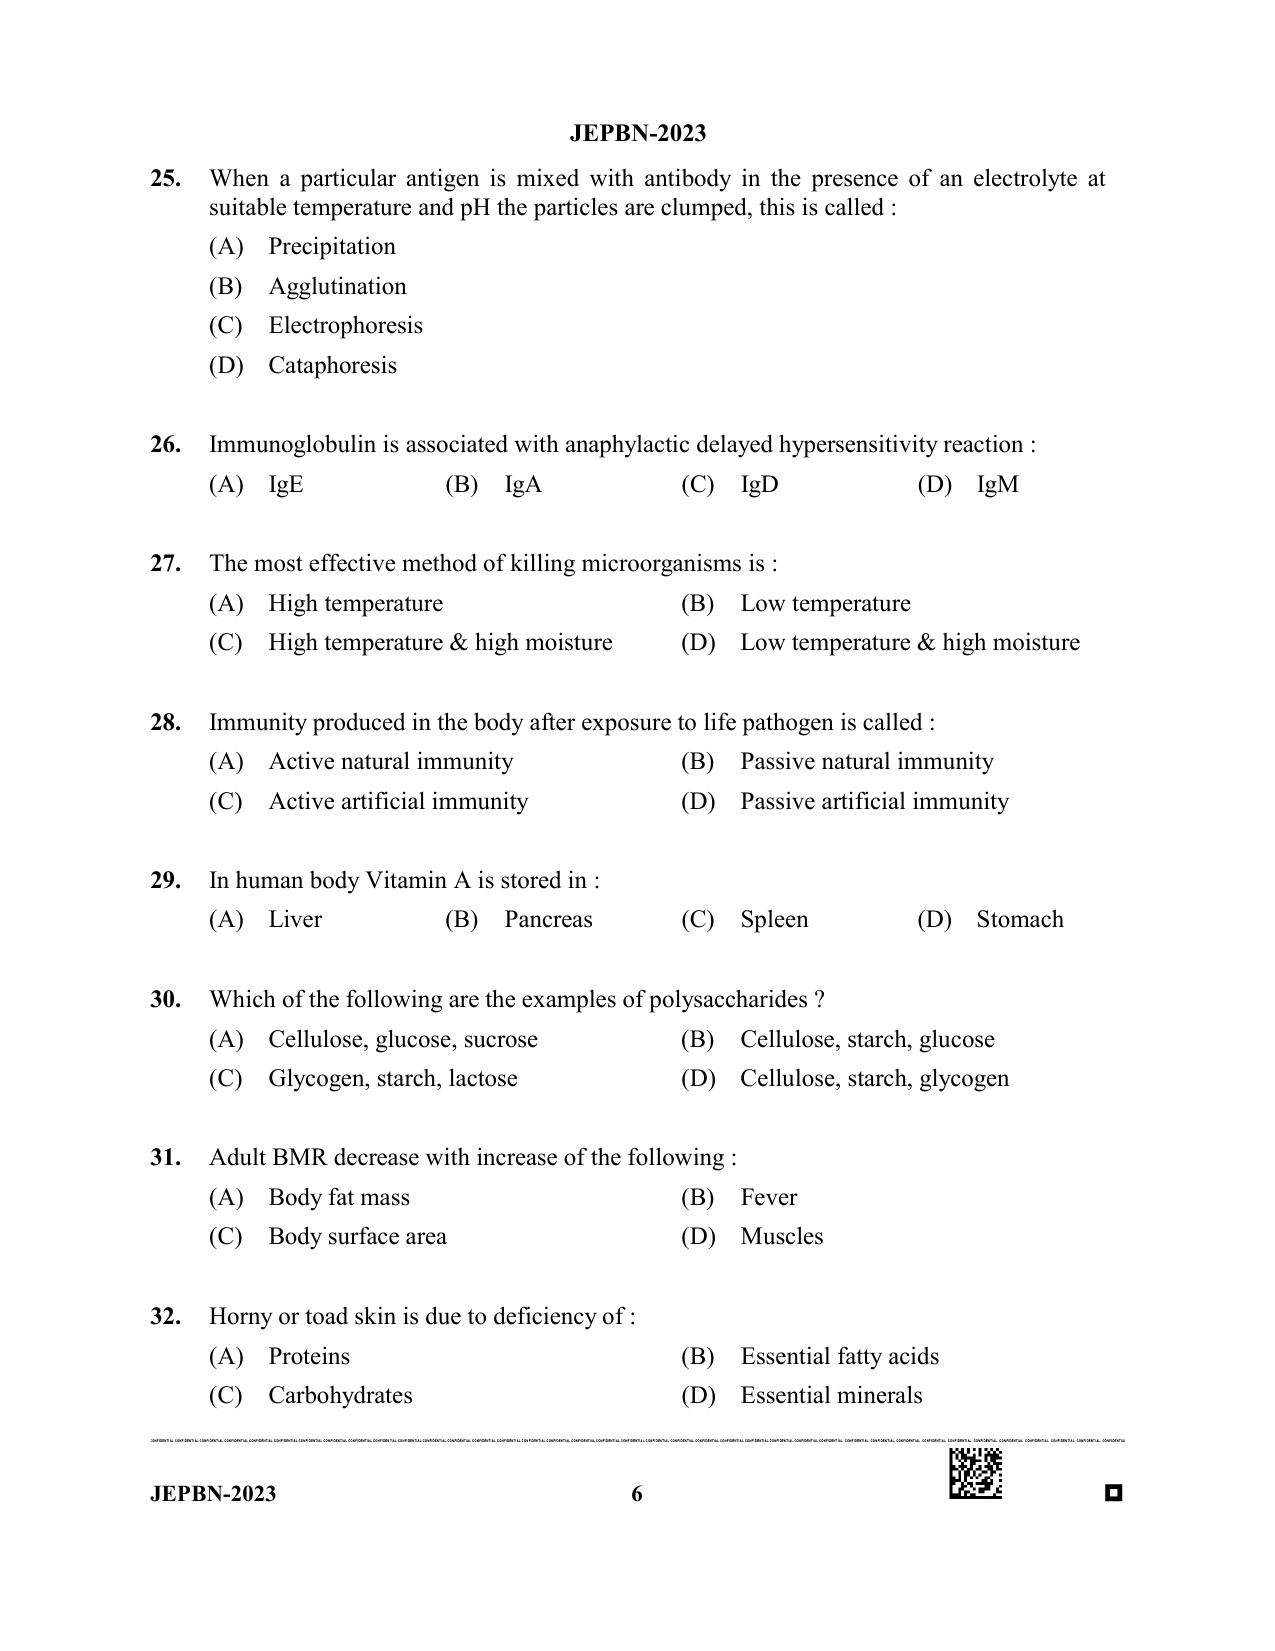 WBJEE JEPBN 2023 Question Paper - Page 6